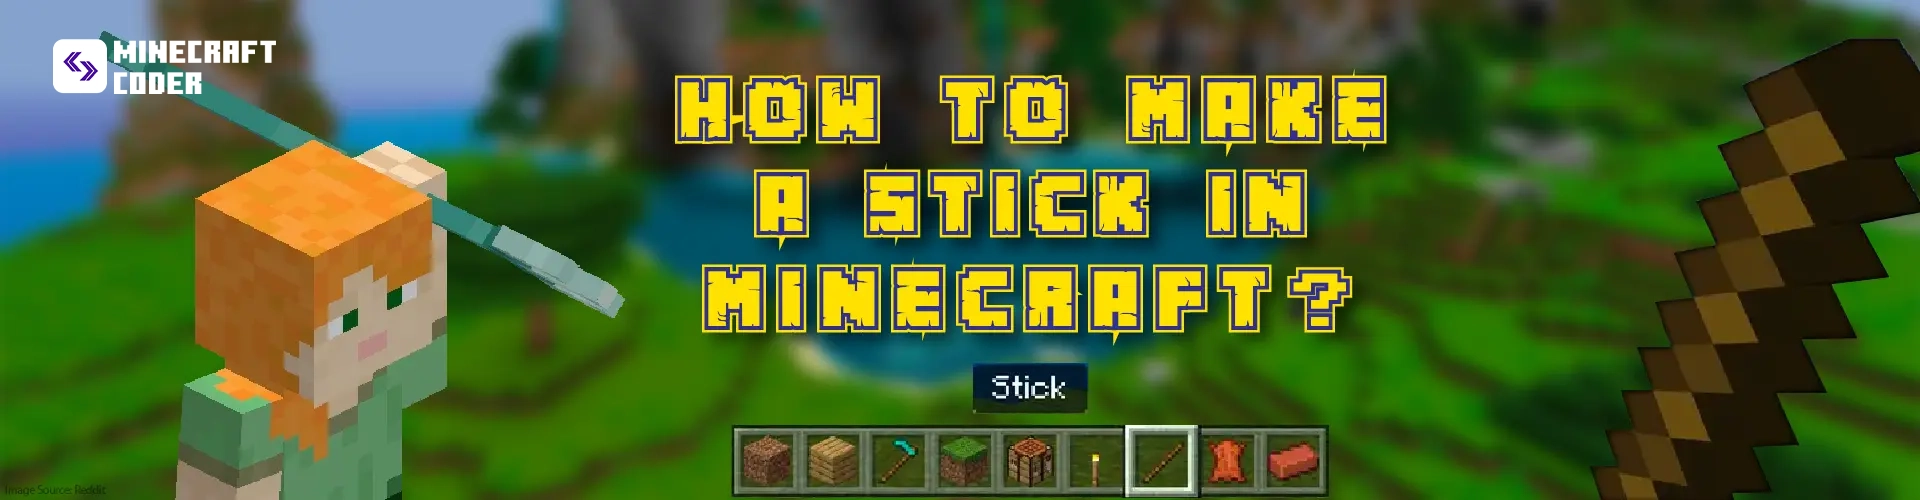 How to Make a Stick in Minecraft